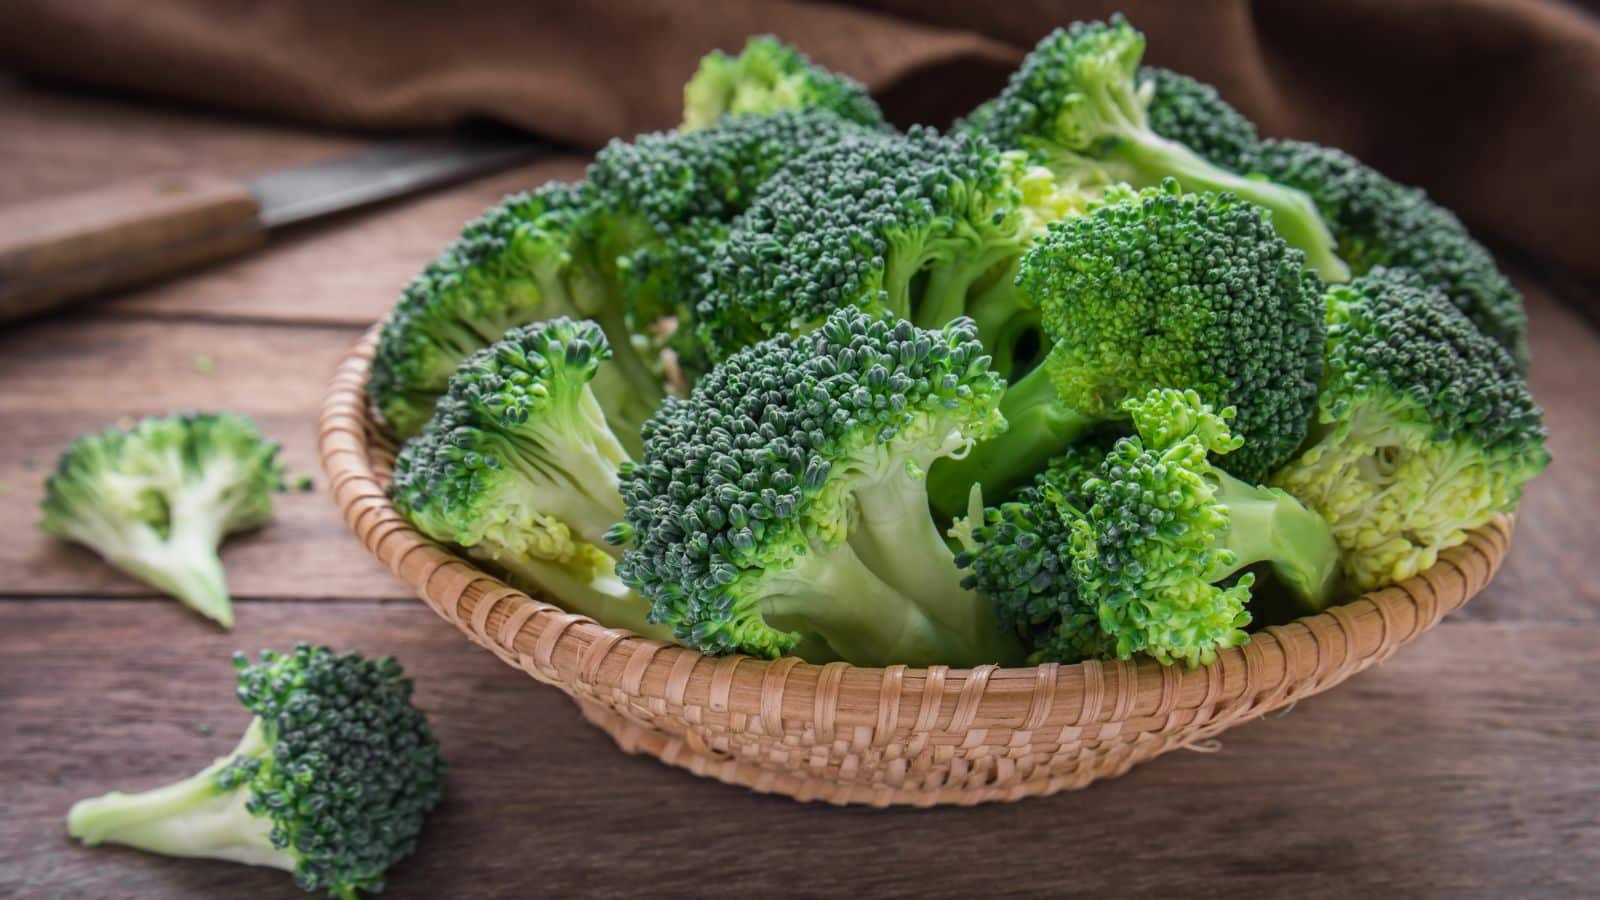 broccoli florets in a beige colored bowl